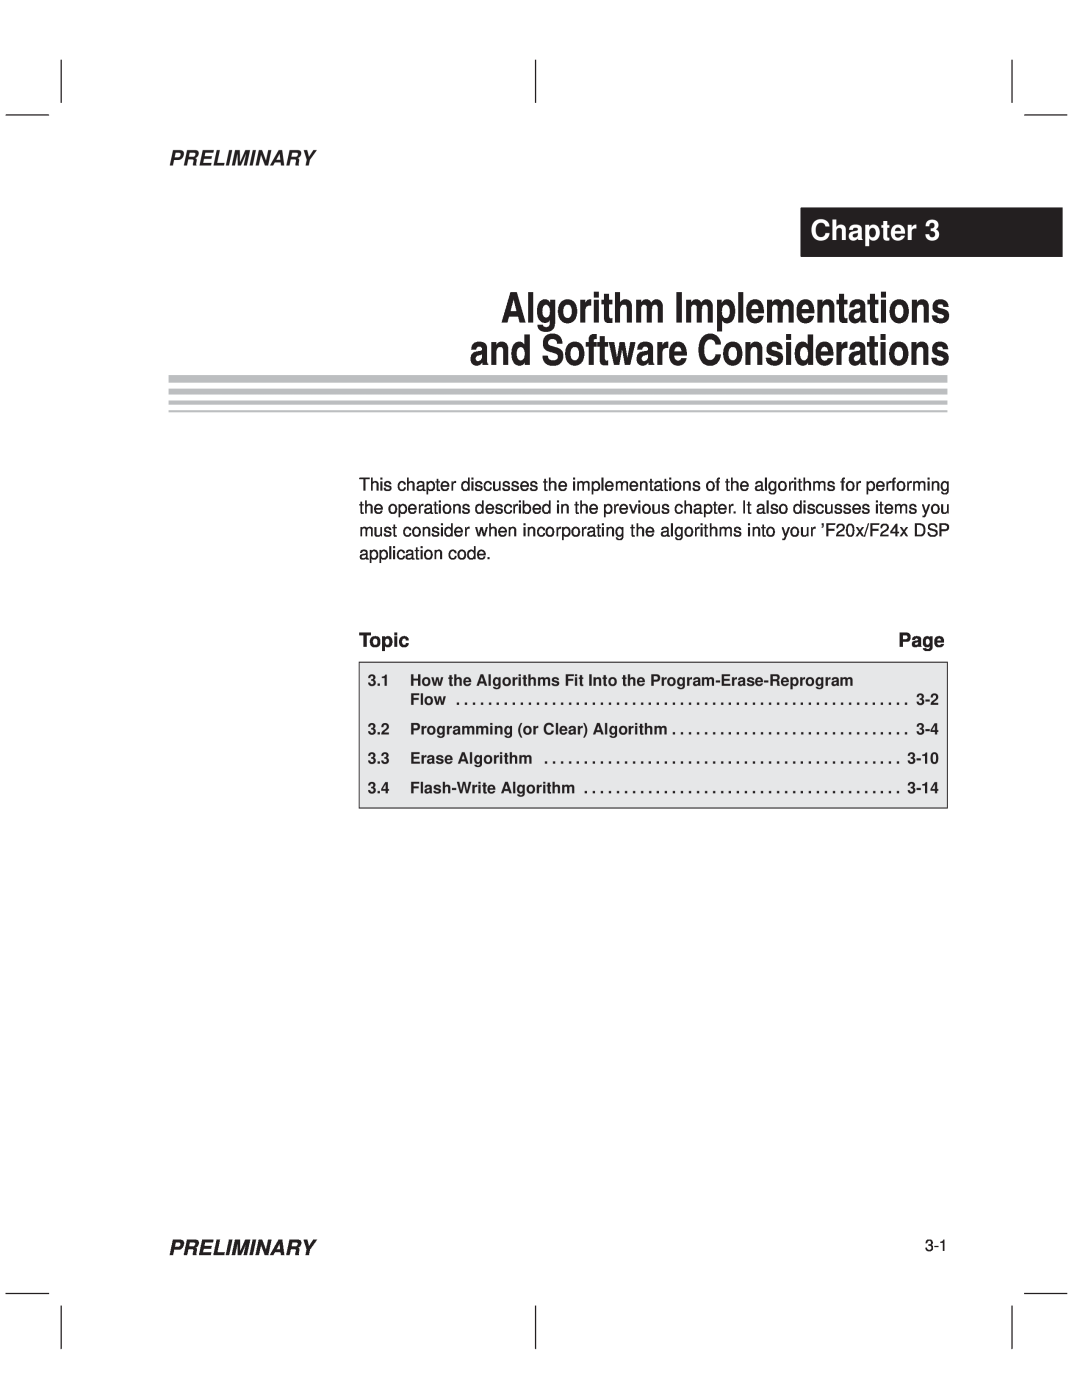 Texas Instruments TMS320F20x/F24x DSP Algorithm Implementations and Software Considerations, Chapter, Preliminary, Topic 